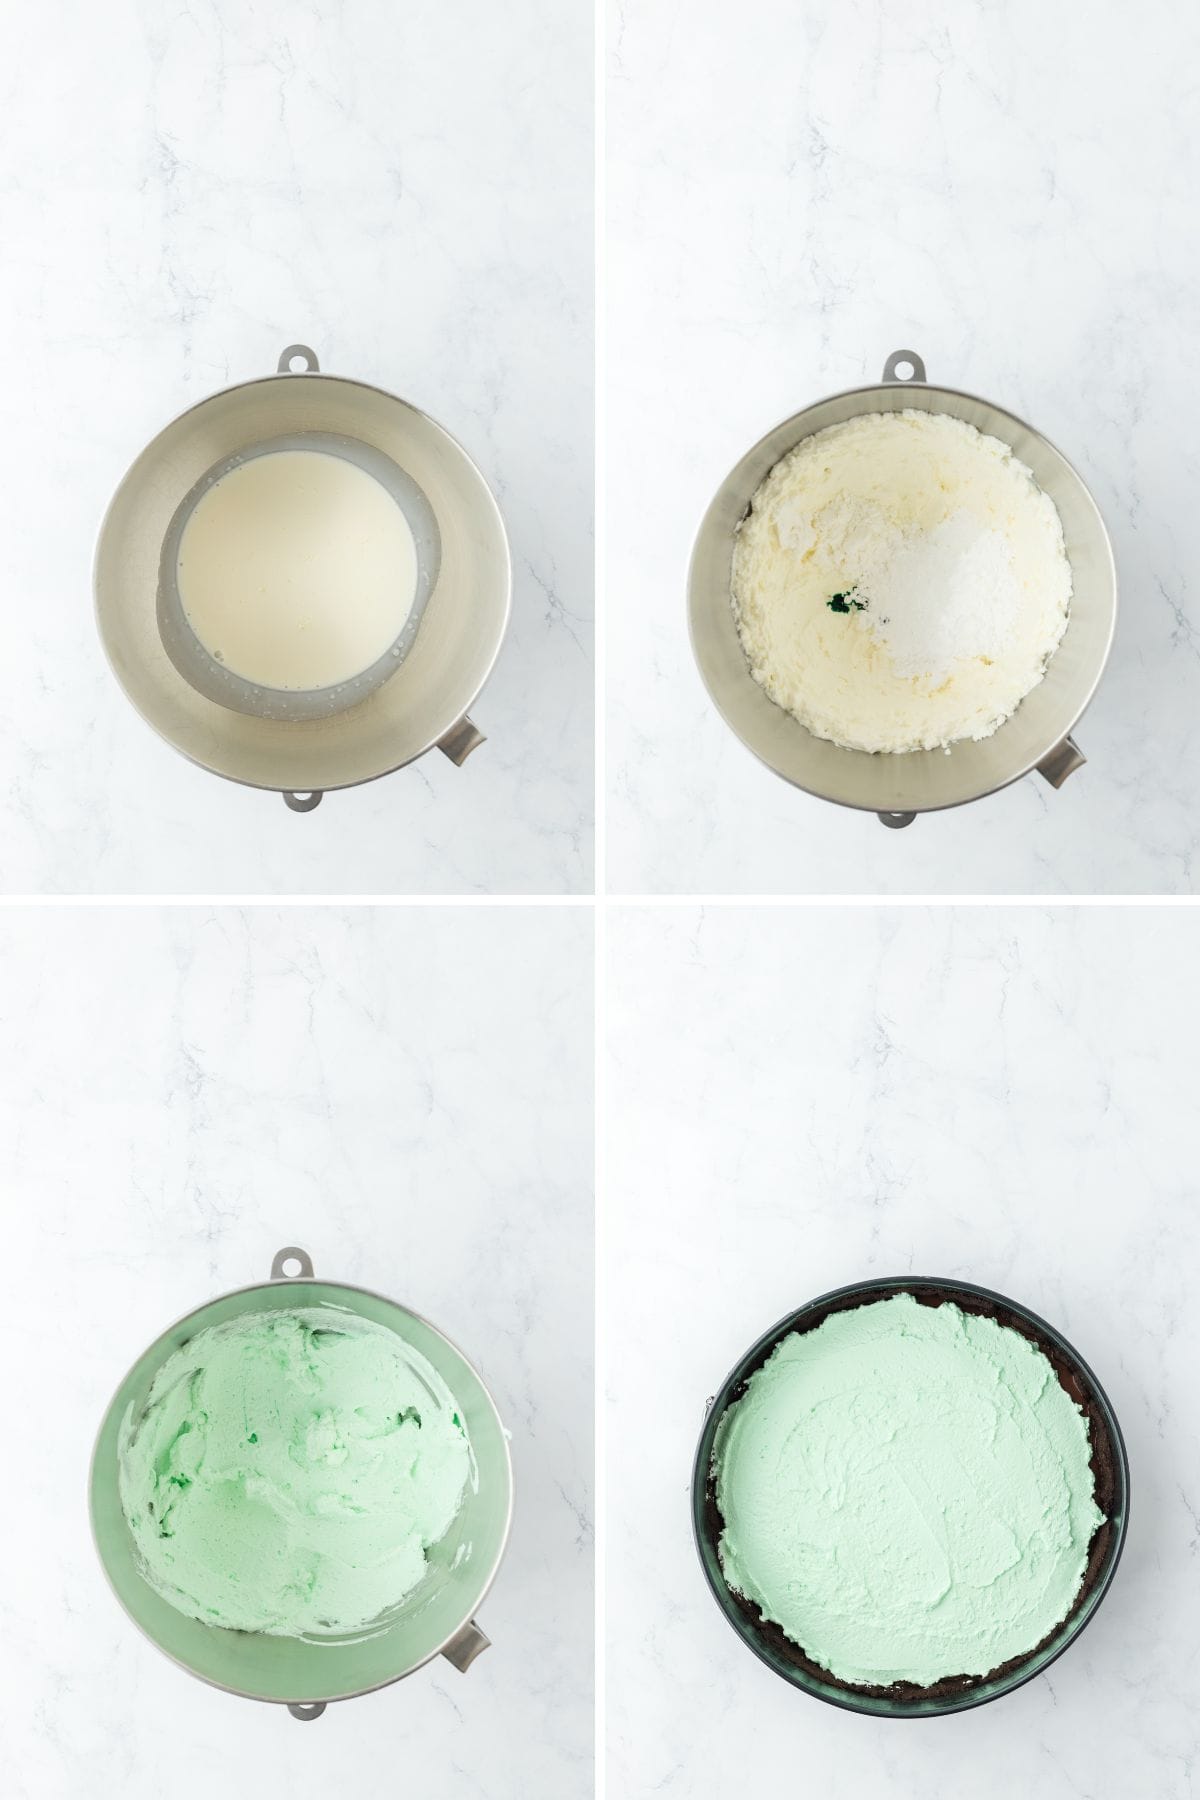 A collage of images showing making the mint topping for the cream pie.